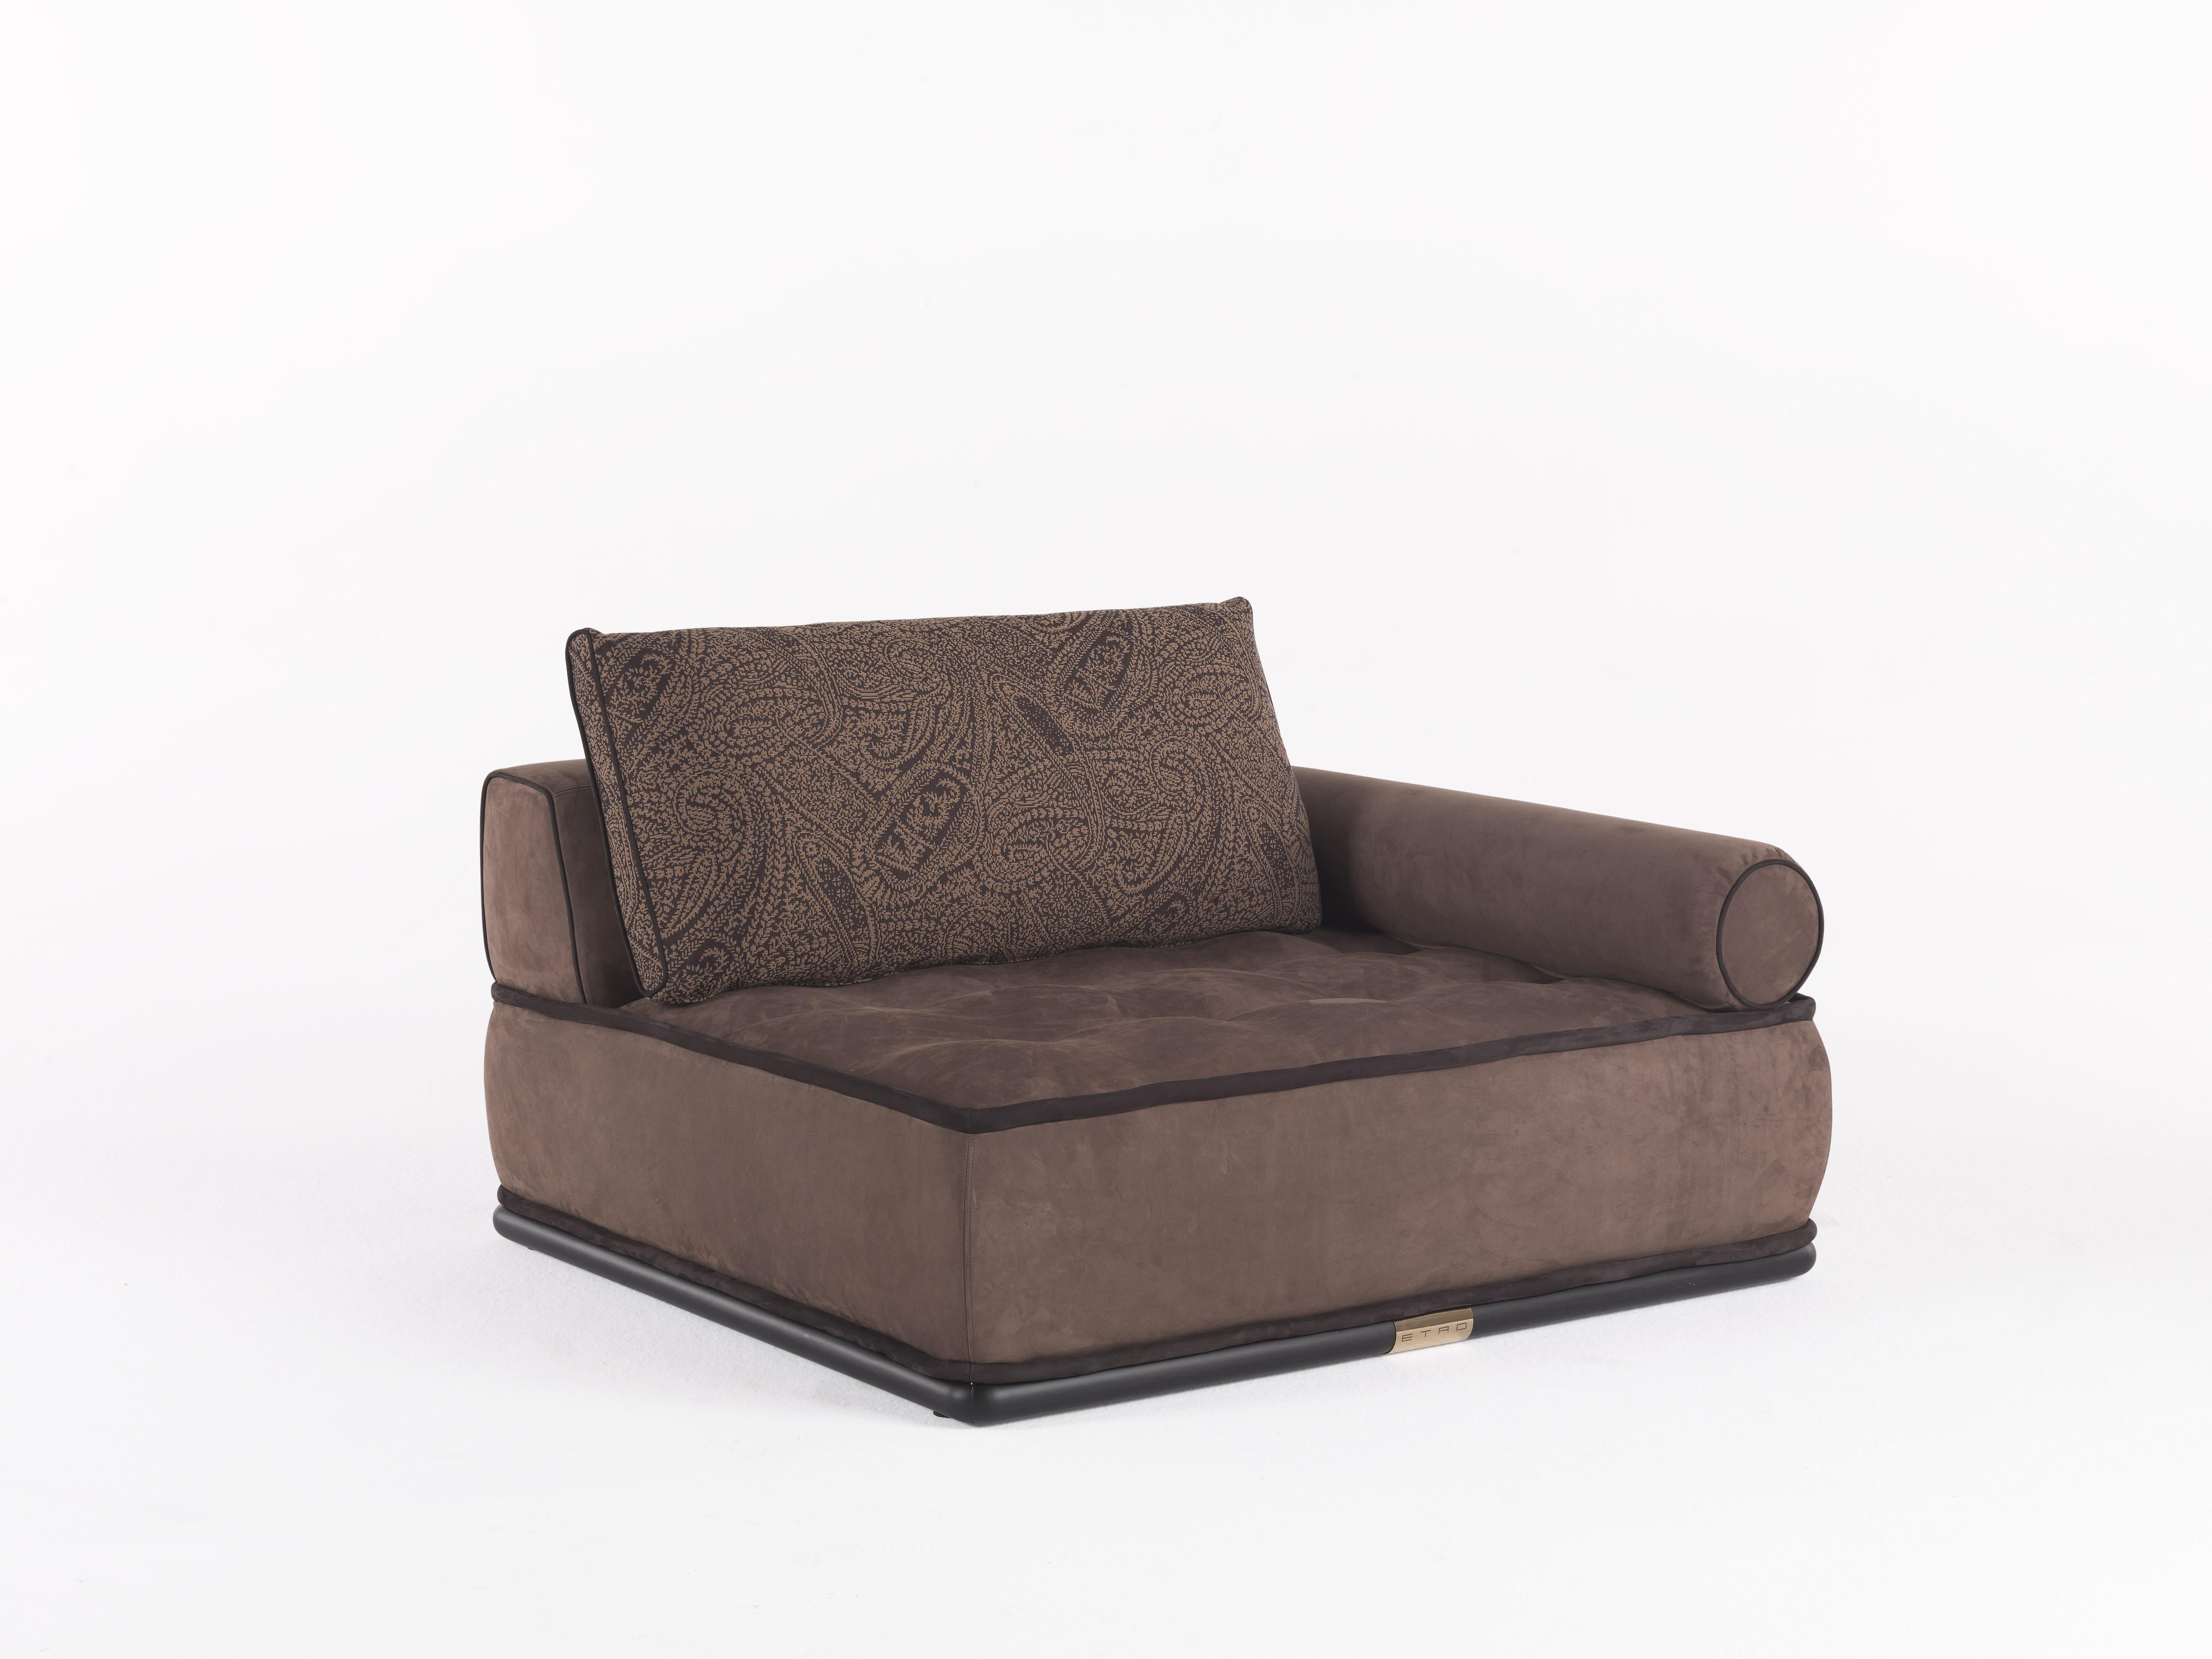 Contemporary 21st Century Woodstock.2 Modular Sofa in Leather by Etro Home Interiors For Sale